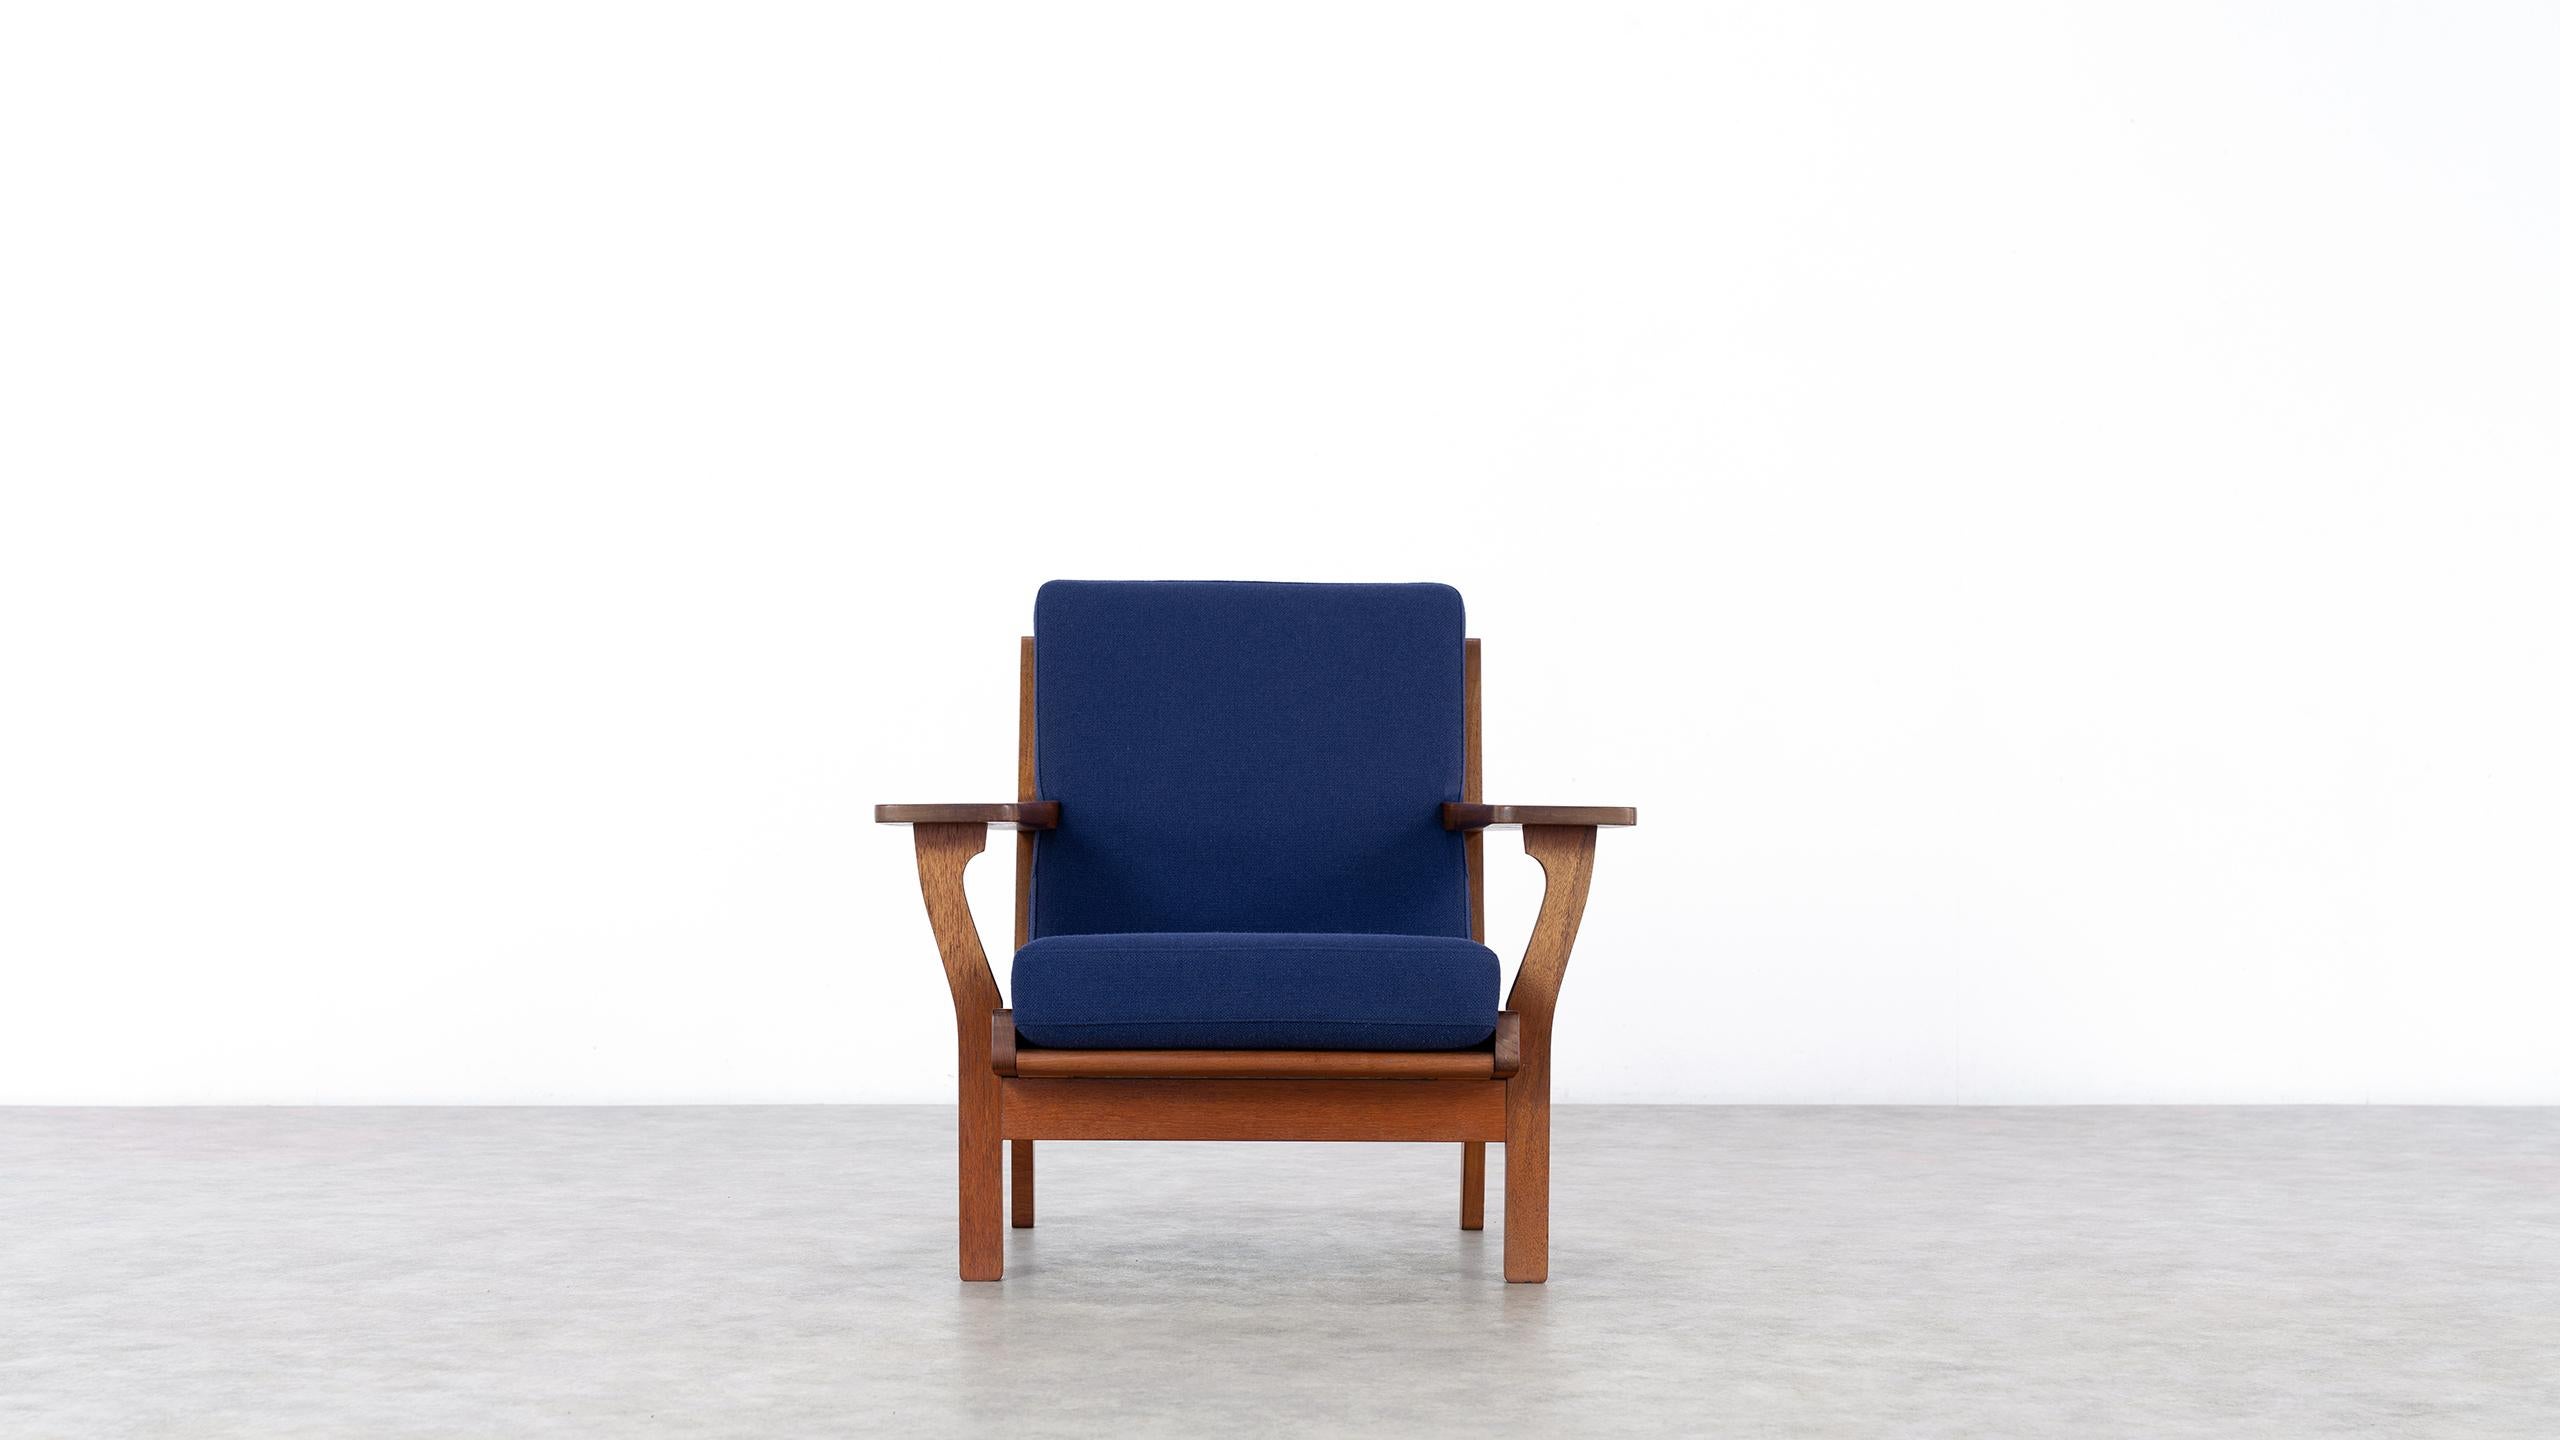 Here you have the opportunity to purchase an extremely rare lounge chair by Hans J. Wegner, designed in 1956 for GETAMA in Denmark. 
The stamped and handcrafted frame is made of teak.

GETAMA still produces many of Wegner's designs today, but not